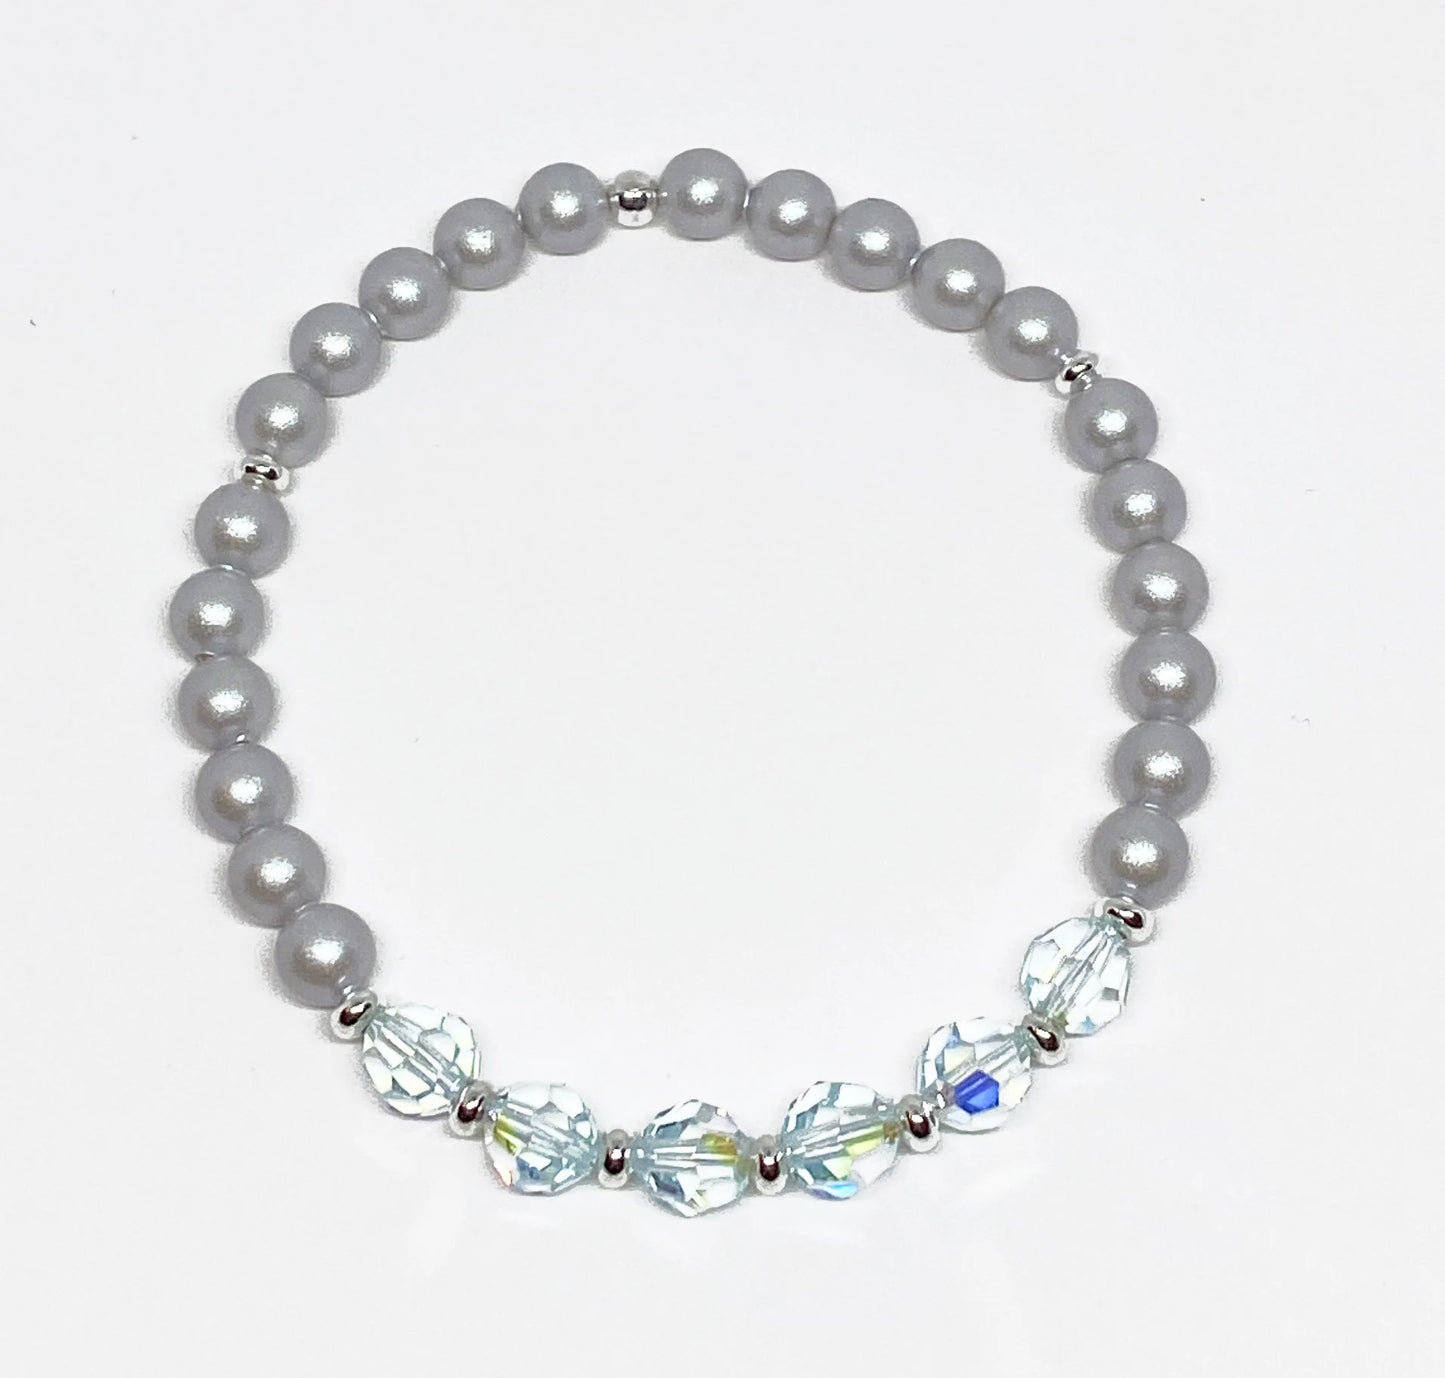 Swarovski Round Crystal and Pearl Bracelet in Lt Azore AB and Iridescent Dove Gray